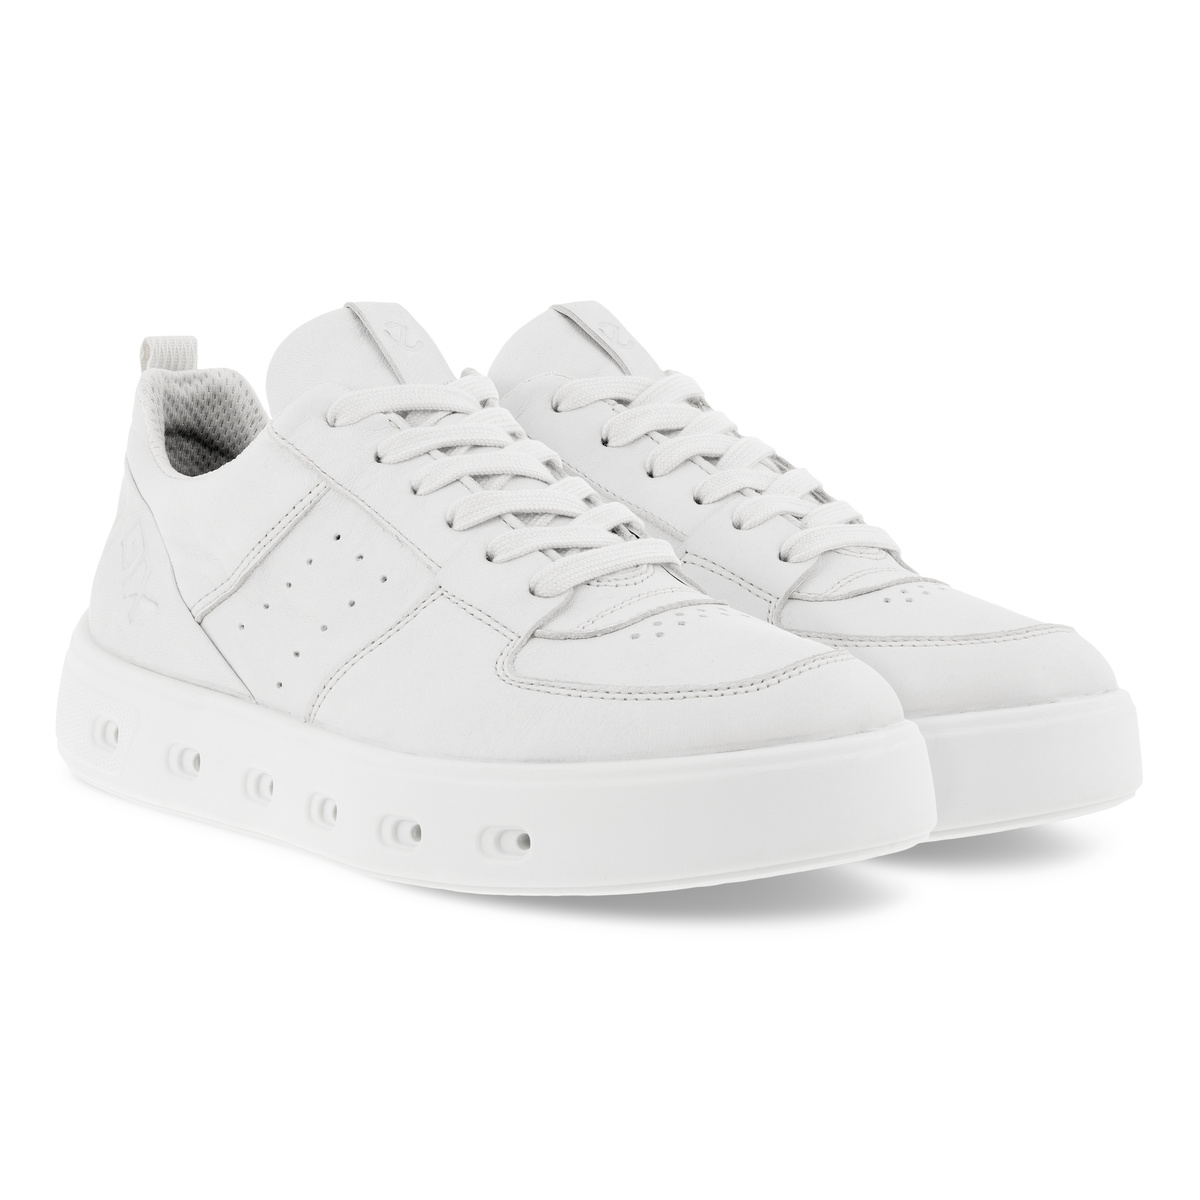 White trainers: Five pairs to try out | Stuff